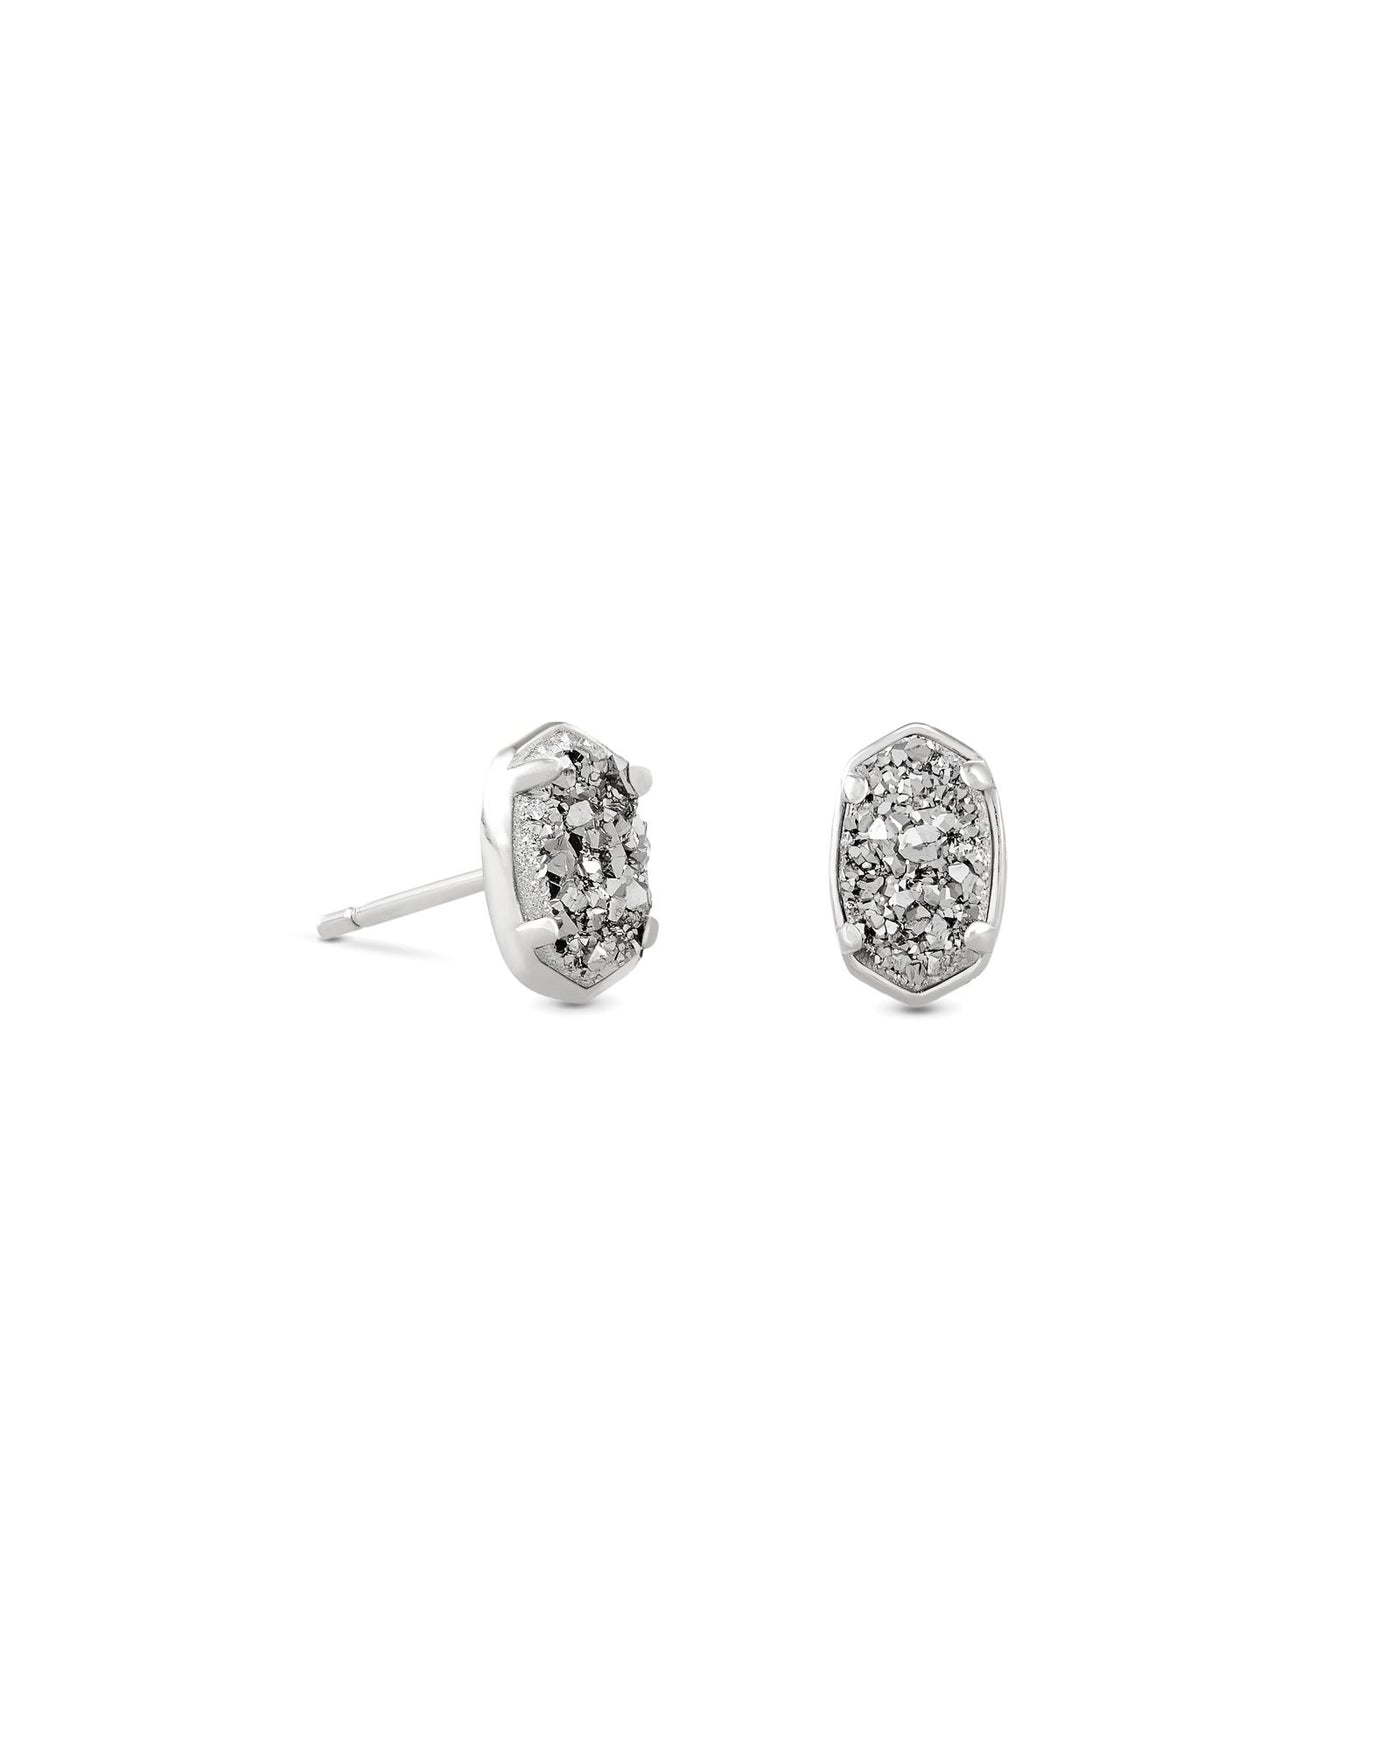 Emilie Stud Earrings Silver Platinum Drusy on white background, front view.